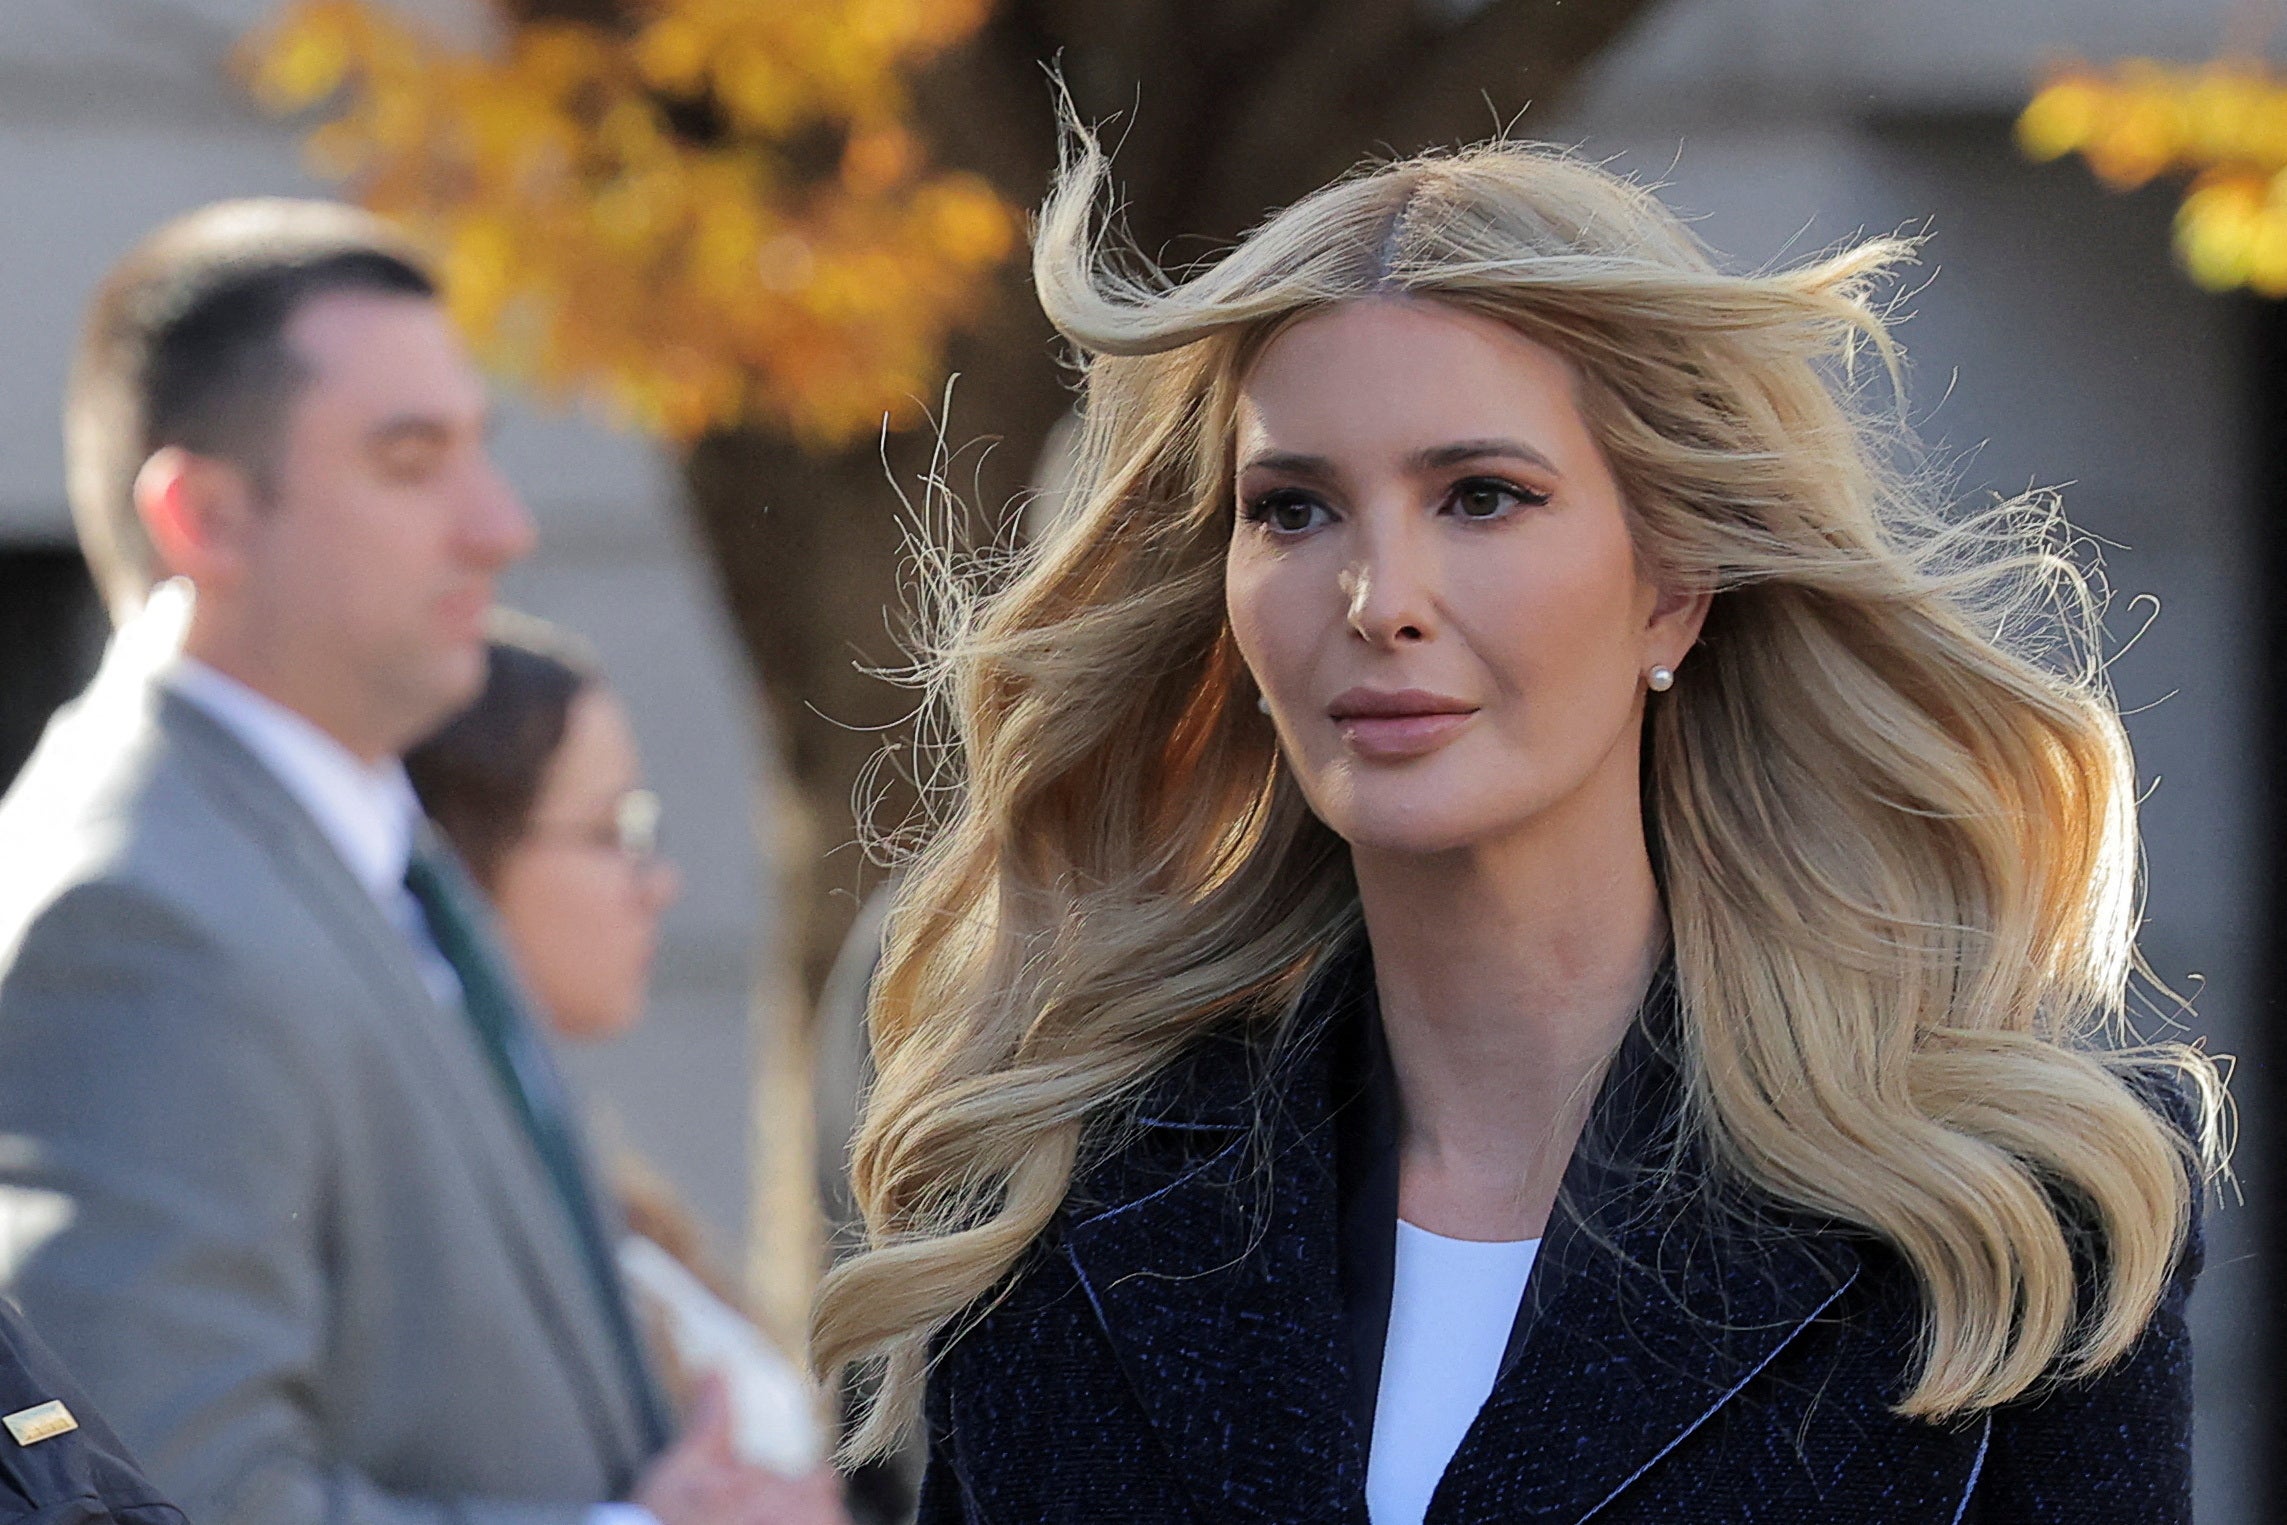 Ivanka Trump arrives at the courthouse to give testimony in the Trump Organization civil fraud trial